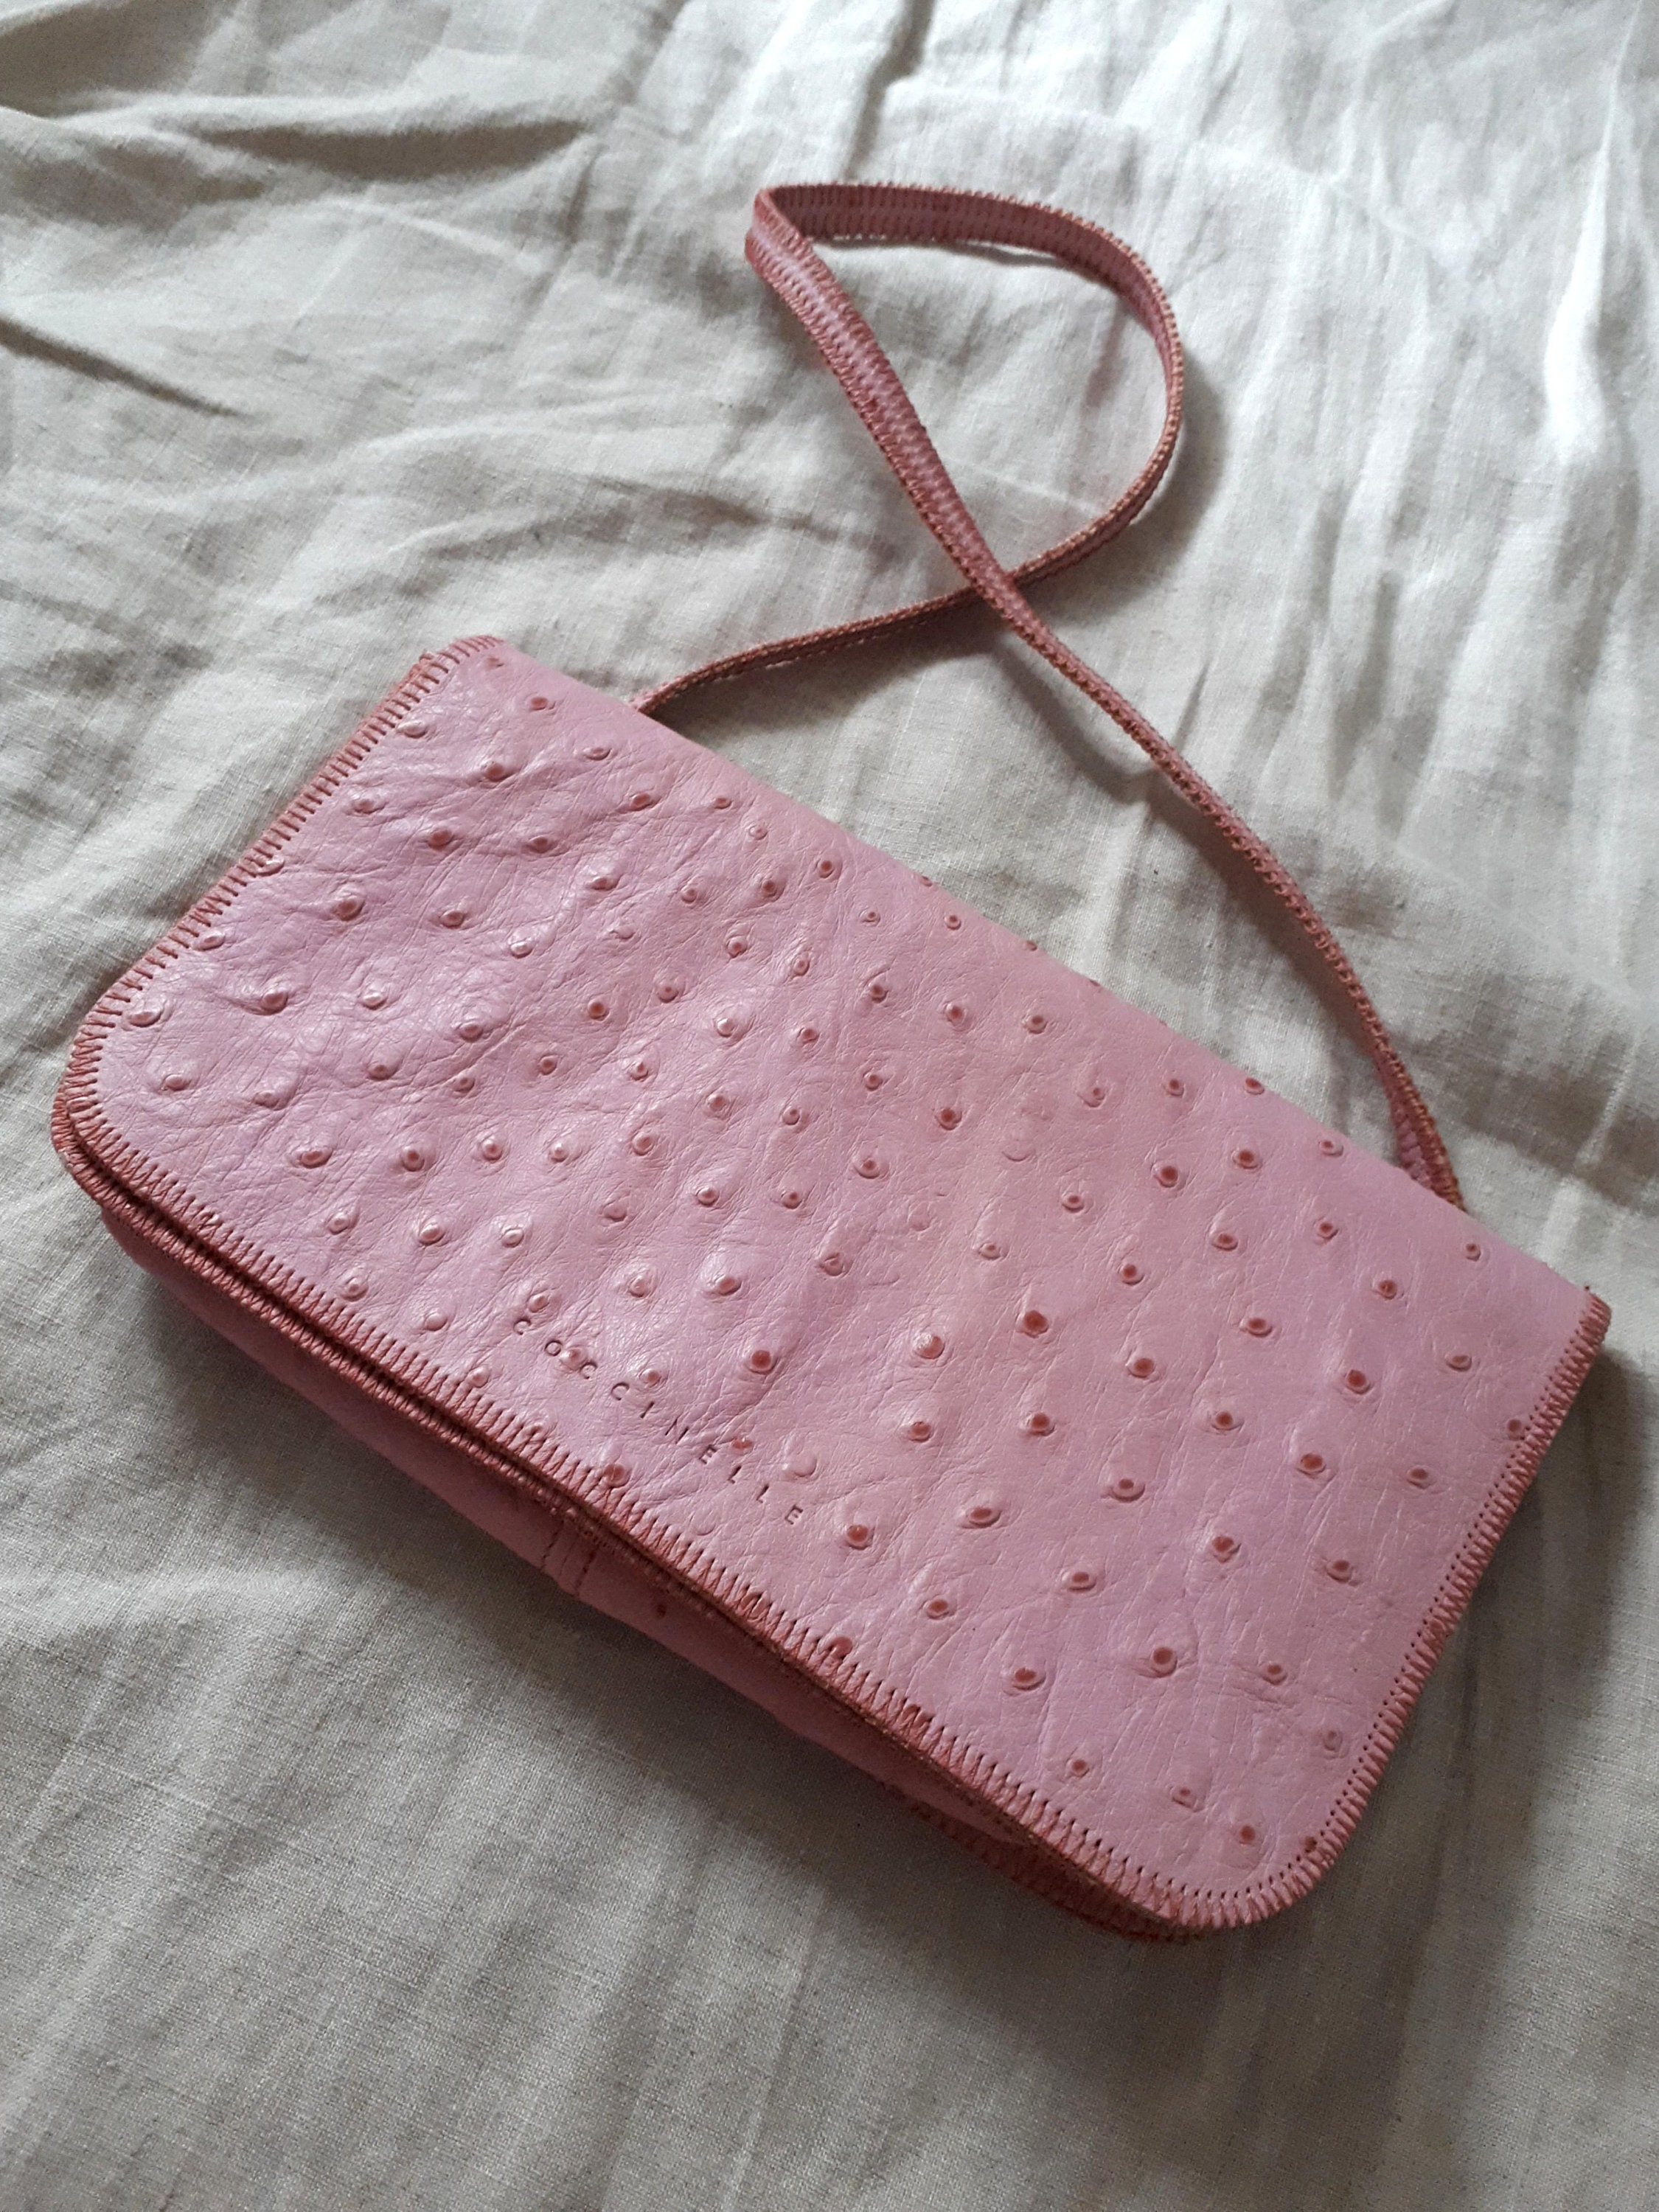 Italy Coccinelle Pink Leather Ostrich Skin Like Style Mini 